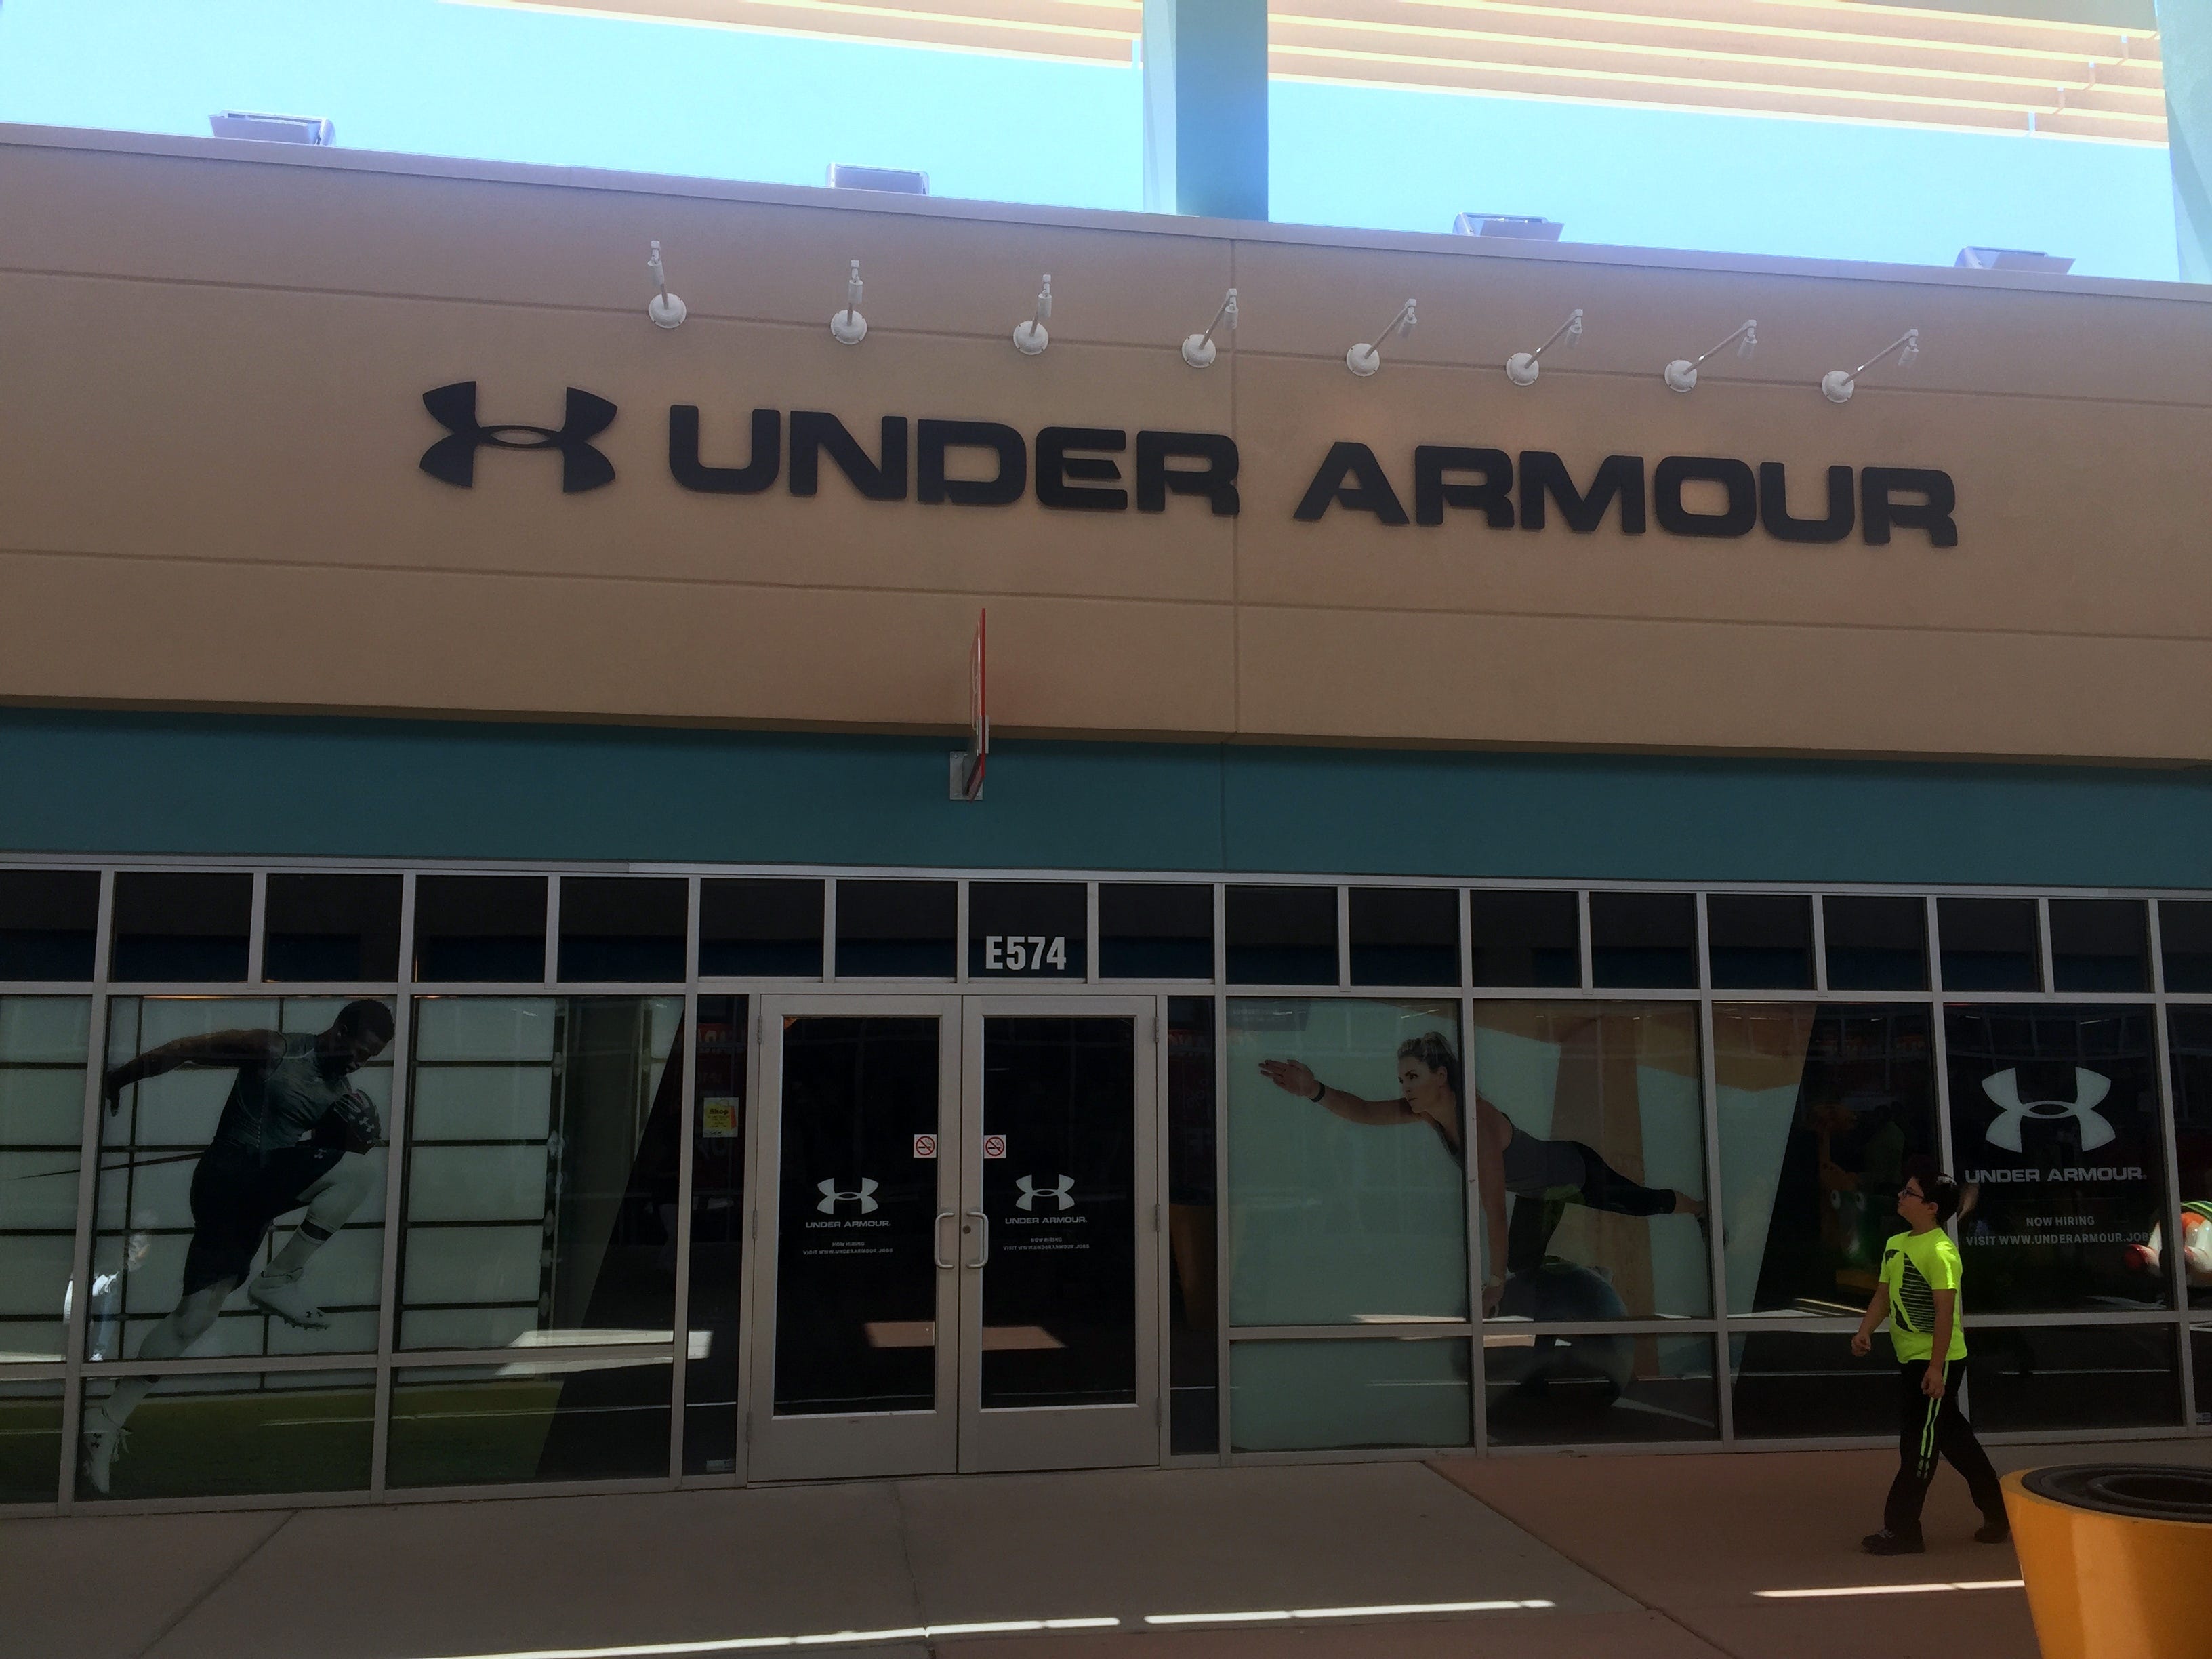 under armour outlet near me now